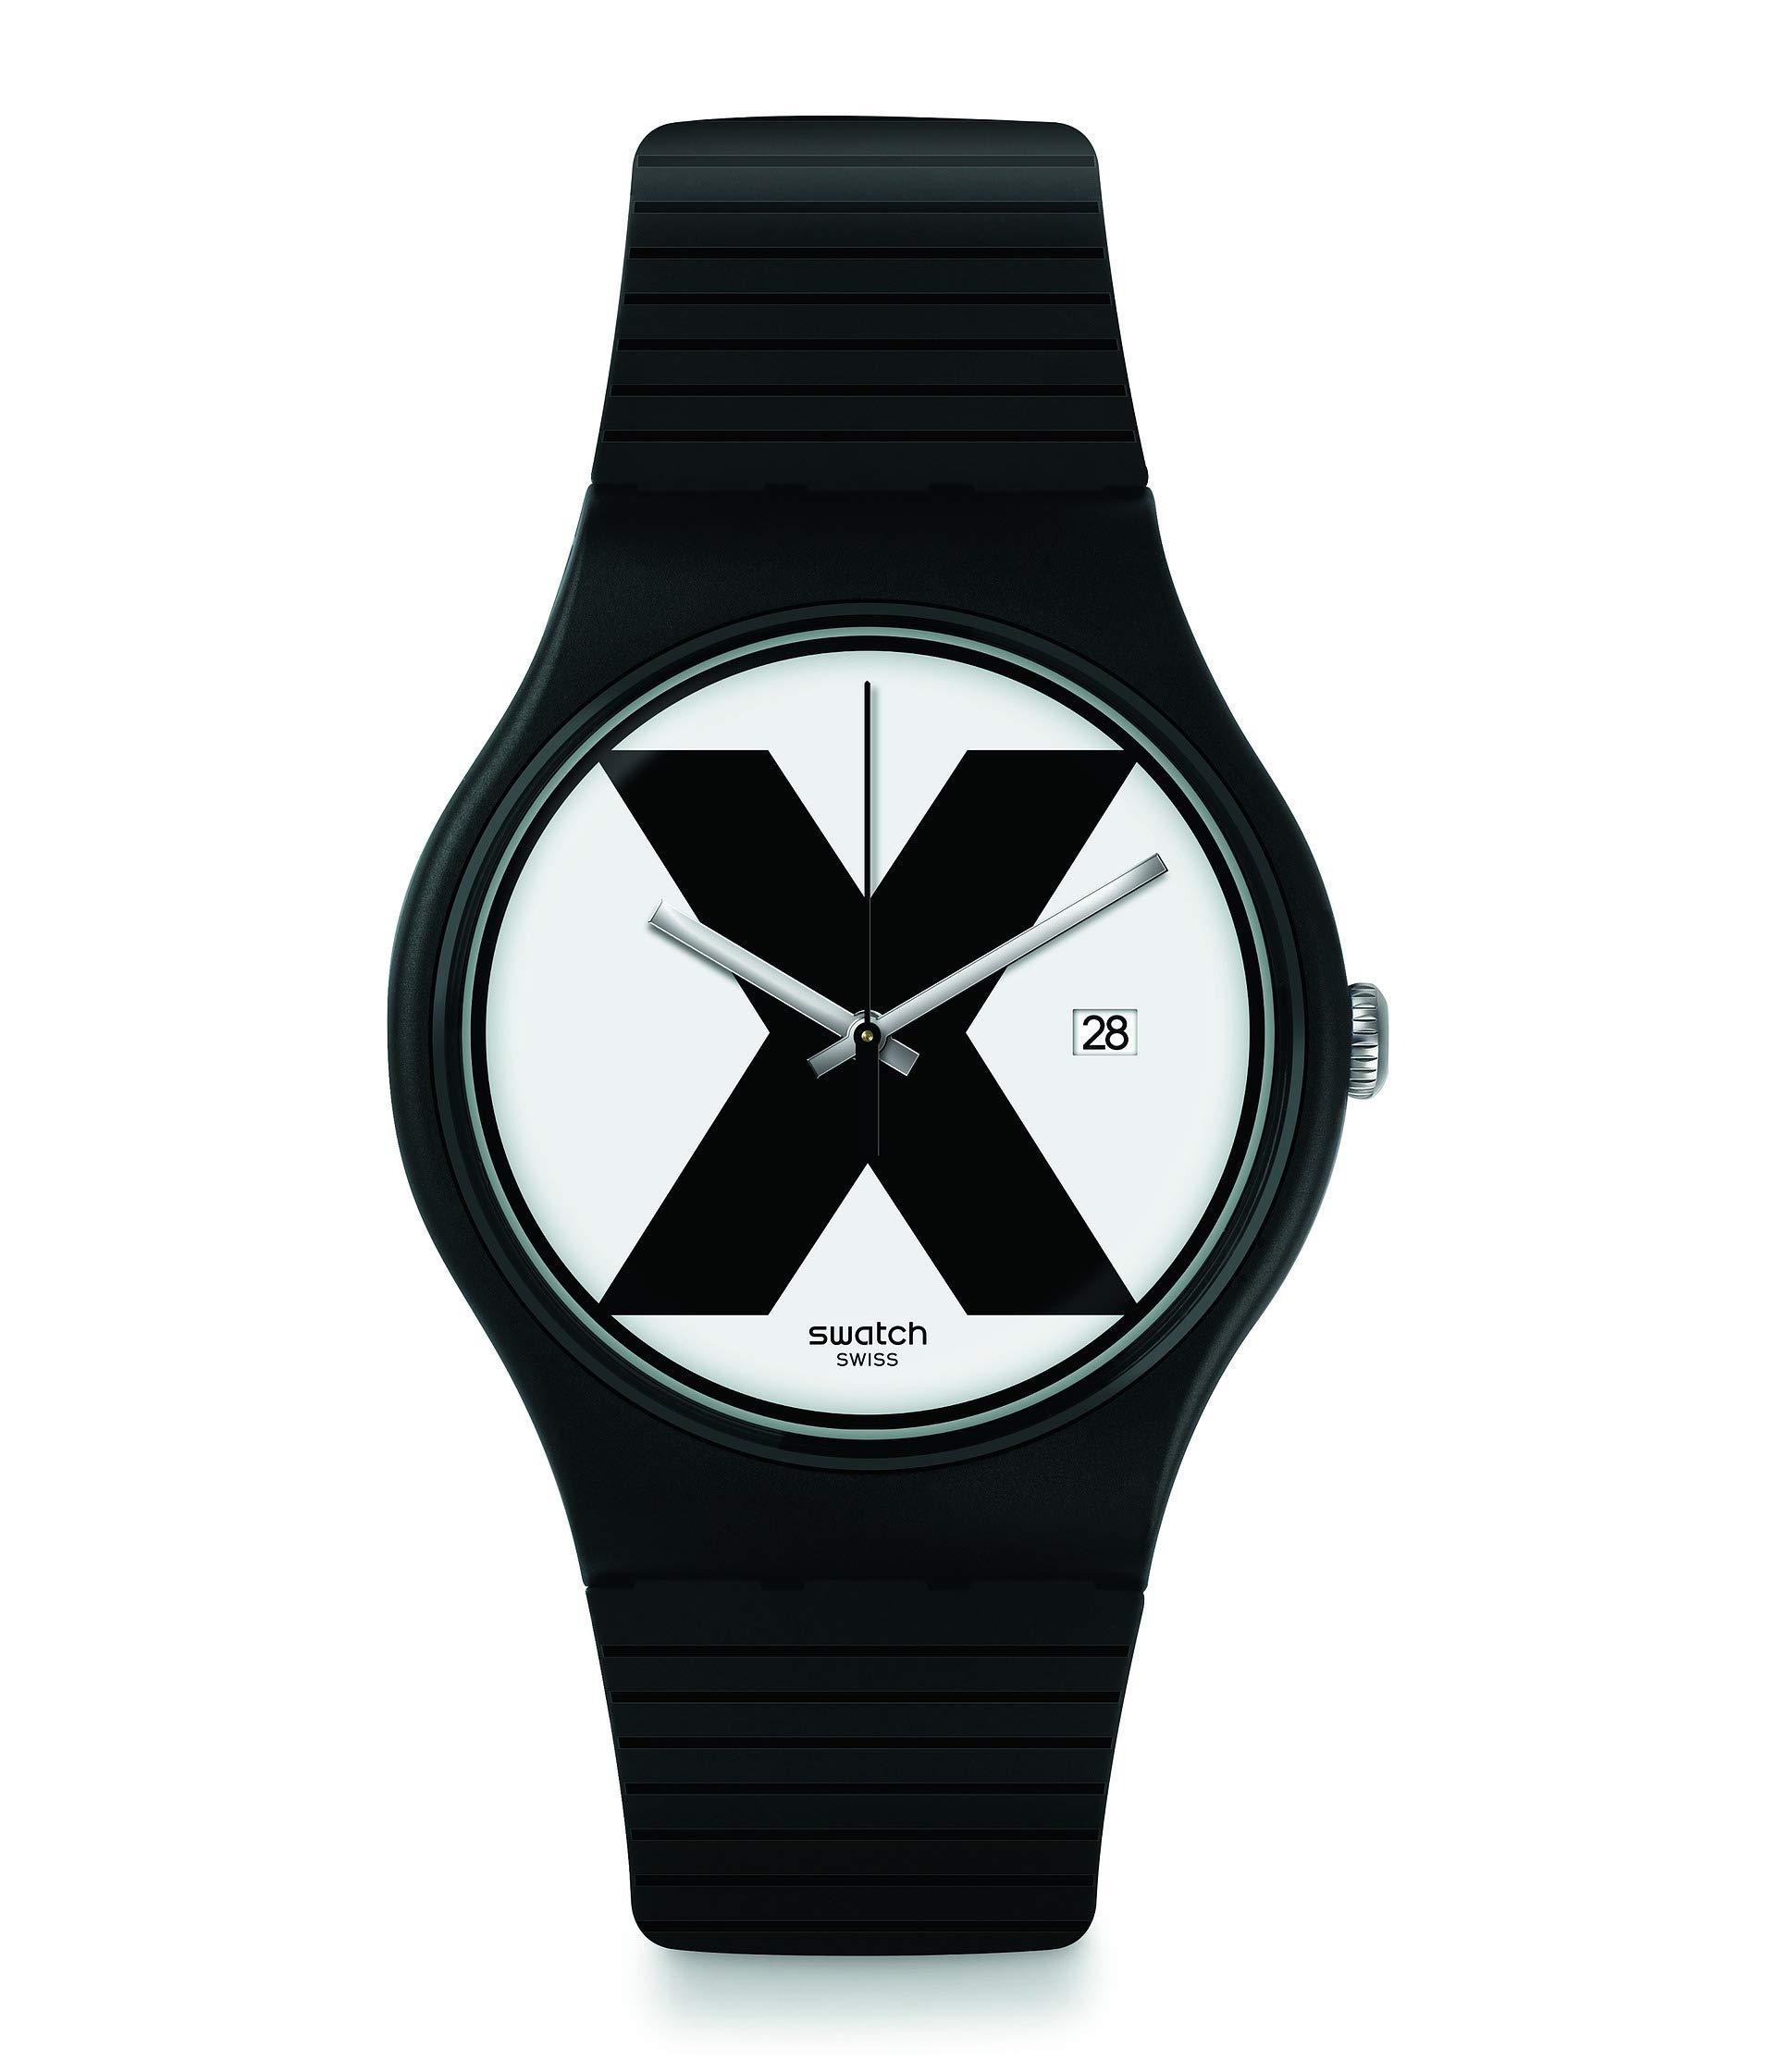 Lyst - Swatch Xx-rated Black - Suob402 (black) Watches in Black for Men